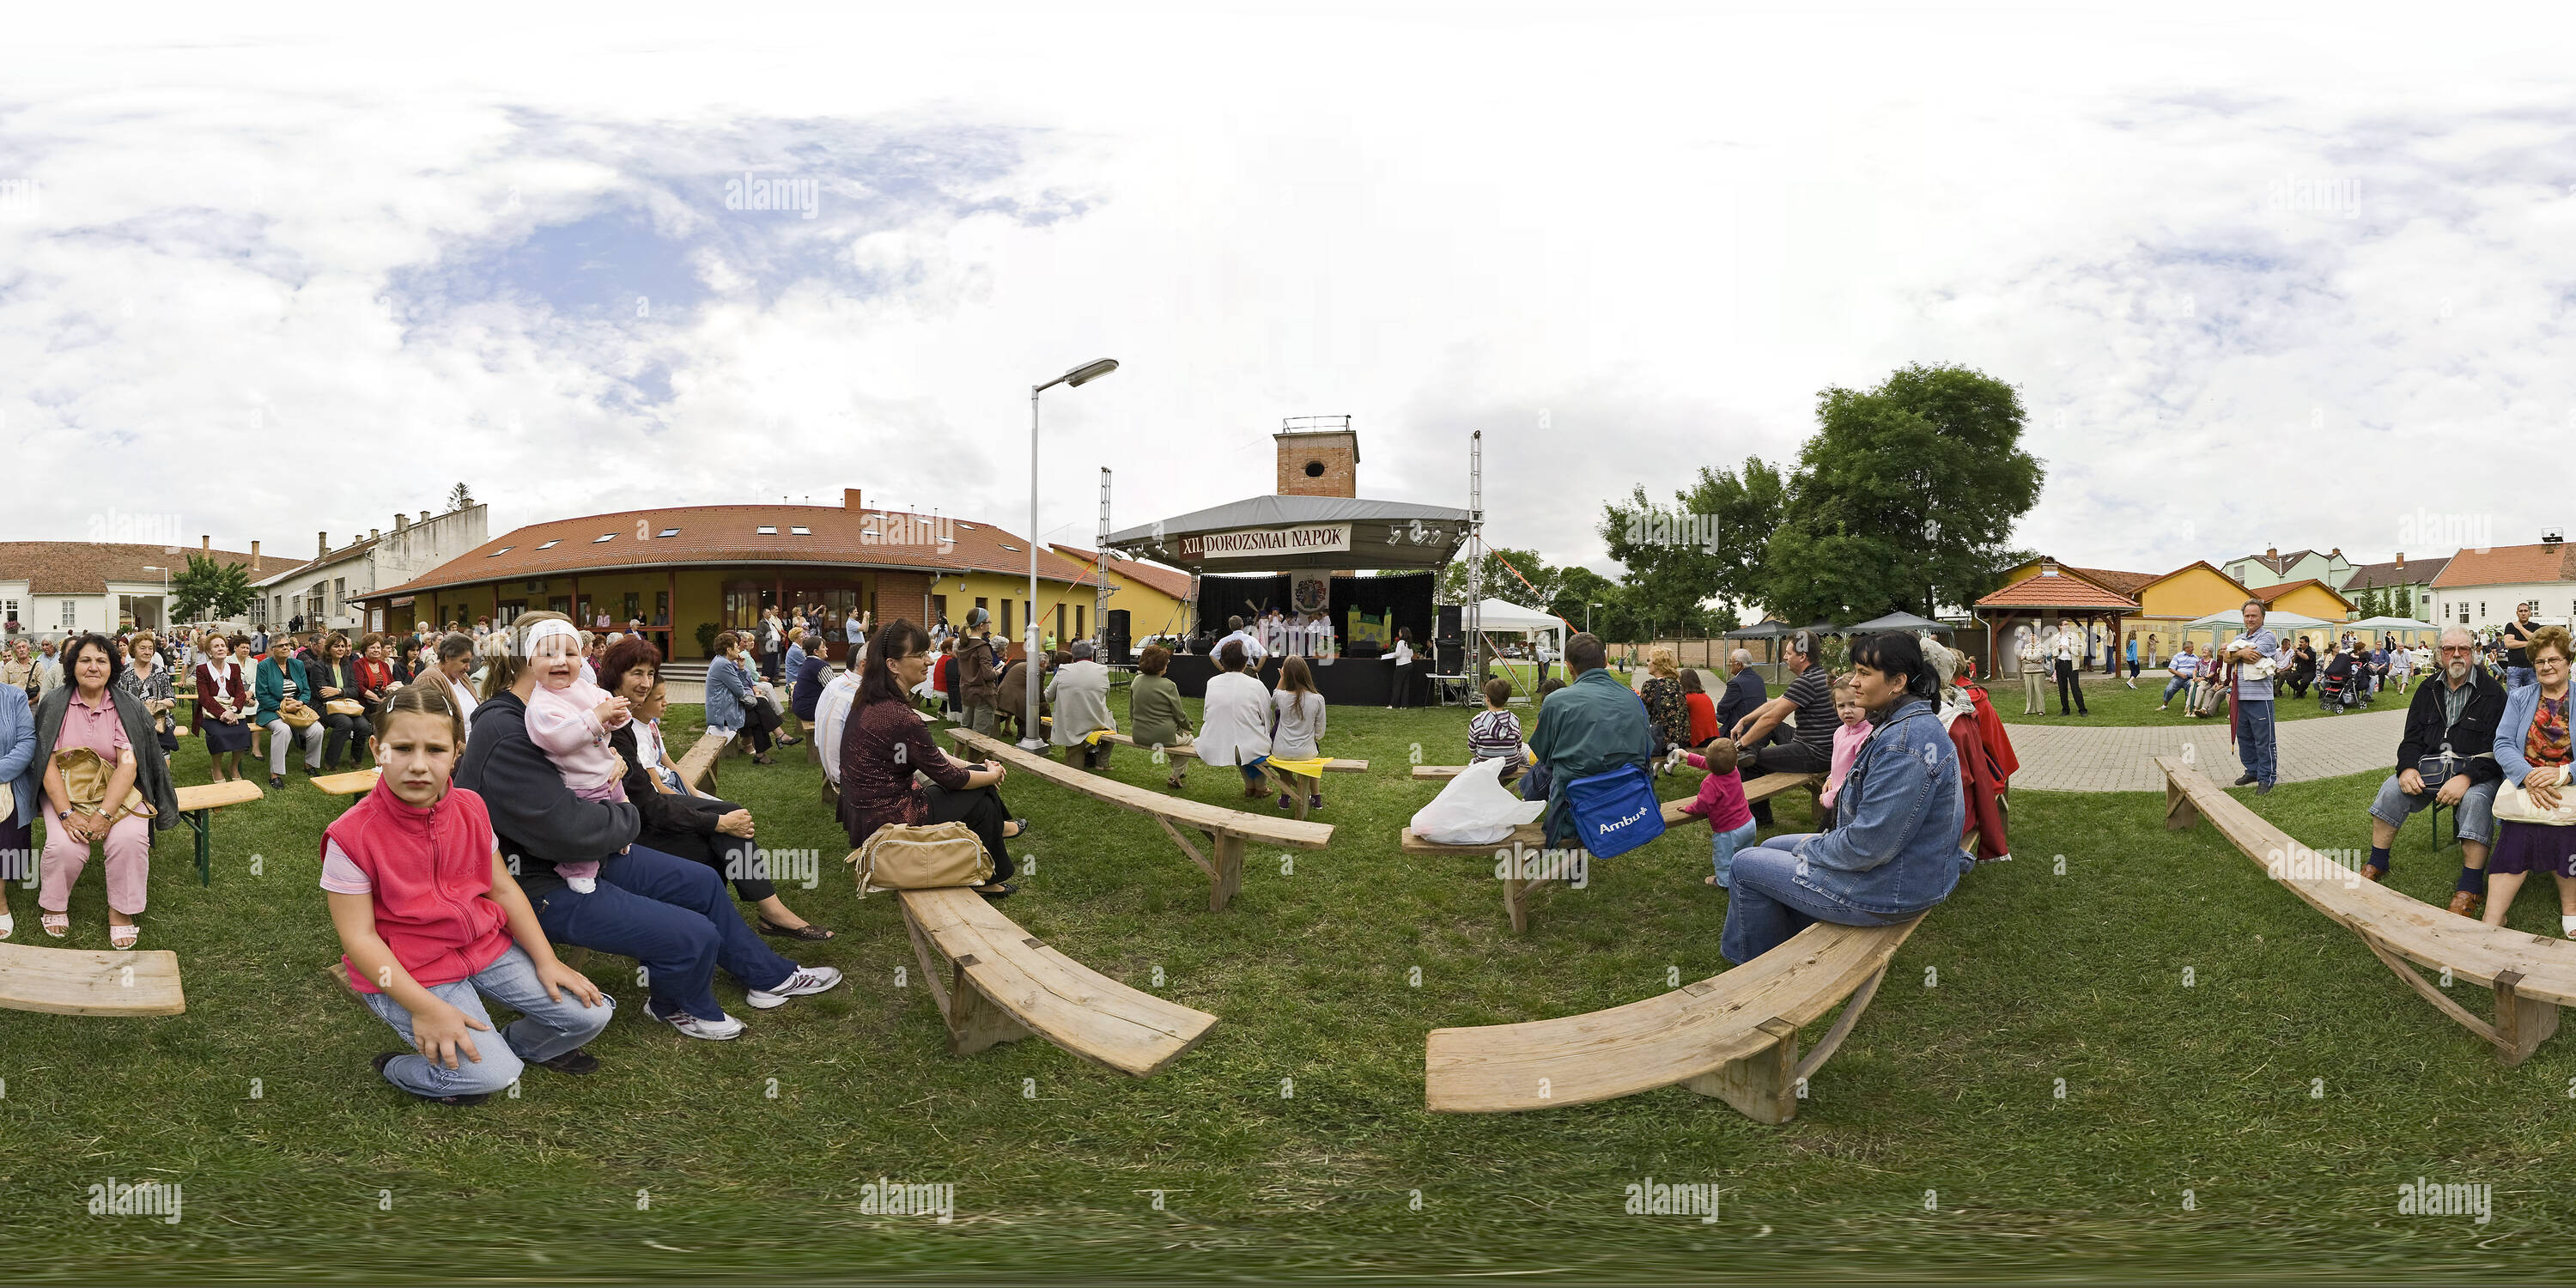 360 degree panoramic view of Dorozsma days - opening ceremony - audience